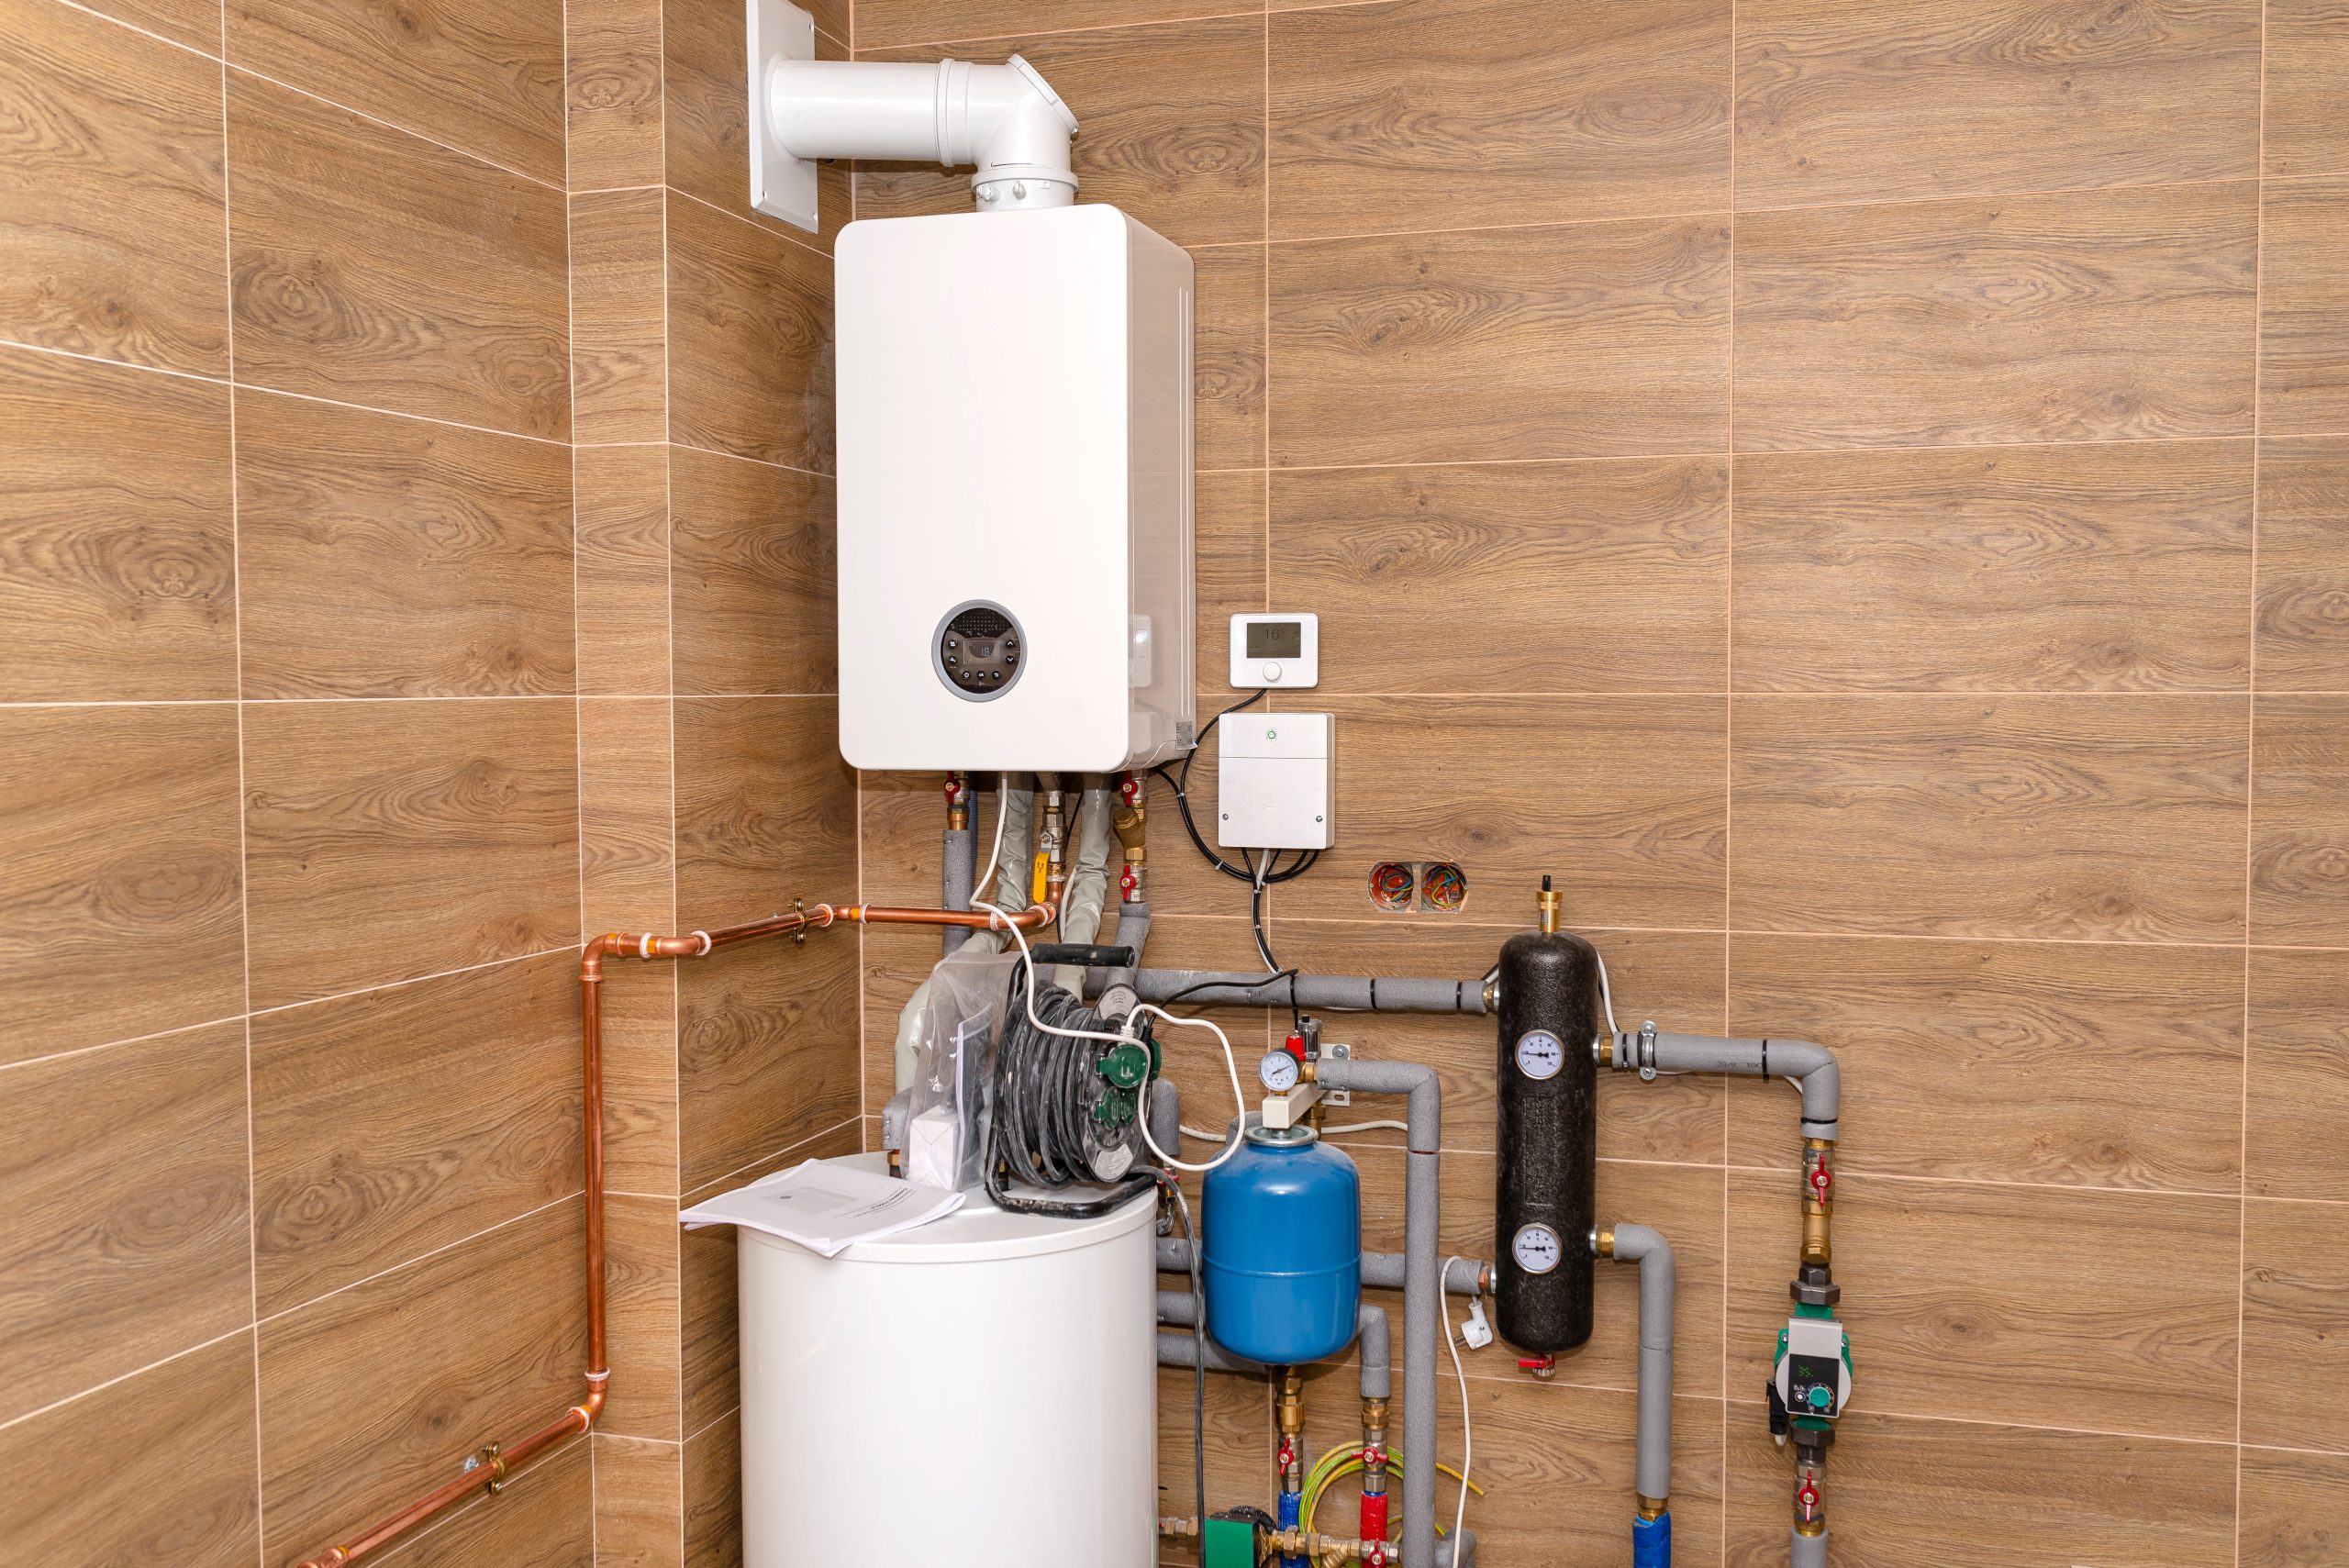 Gas hot water system Gas Appliance Repair Perth from Perth Plumbing and Gasfitting